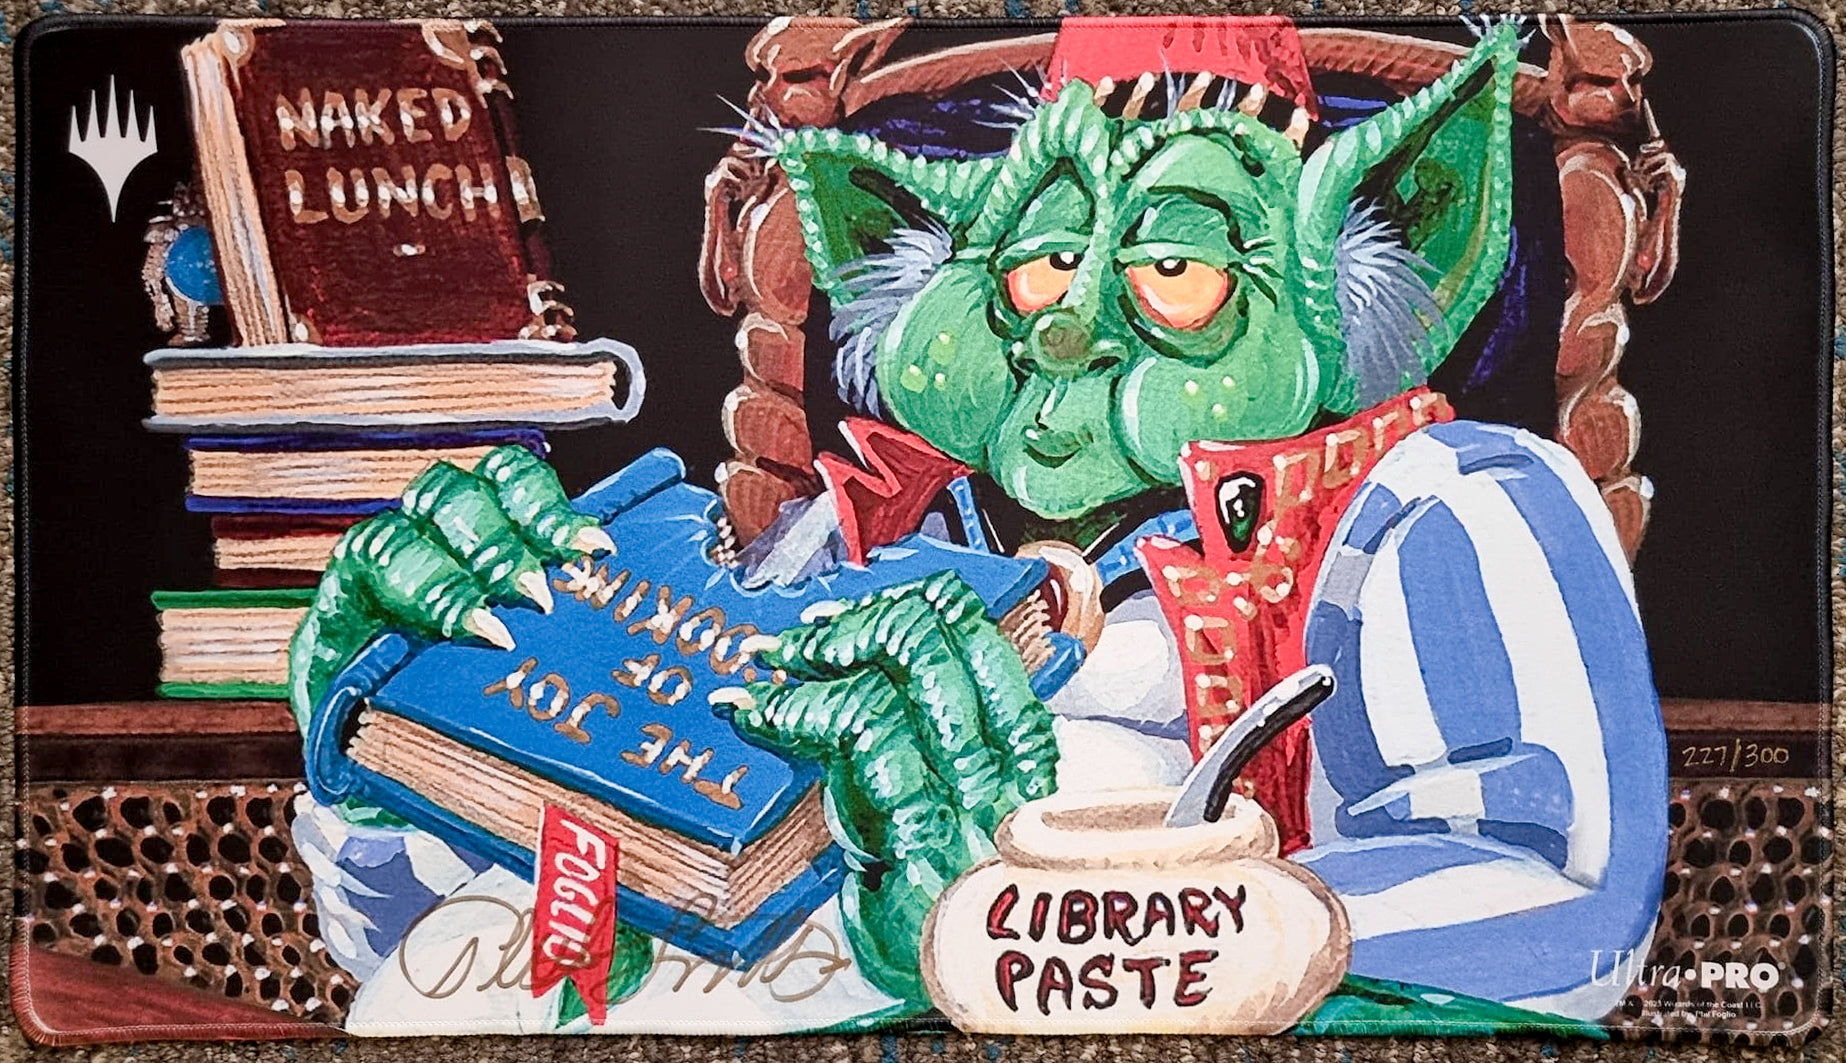 Orcish Librarian - Phil Foglio - Limited Edition [300 Copies] - Embroidered - Signed by the Artist - MTG Playmat